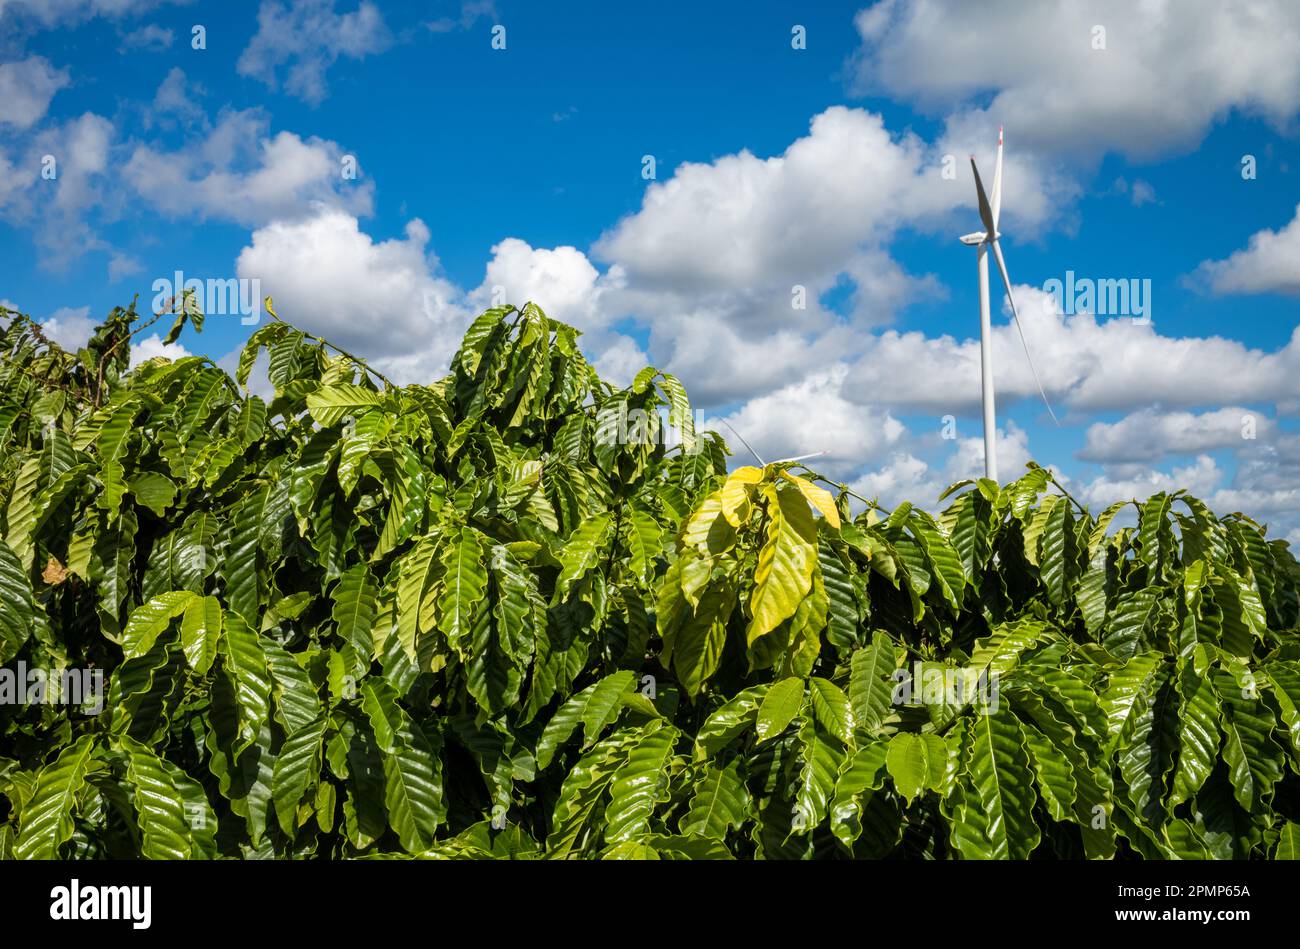 A huge wind turbine rises behind coffee trees in Gia Lai province in the Central Highlands of Vietnam. Stock Photo